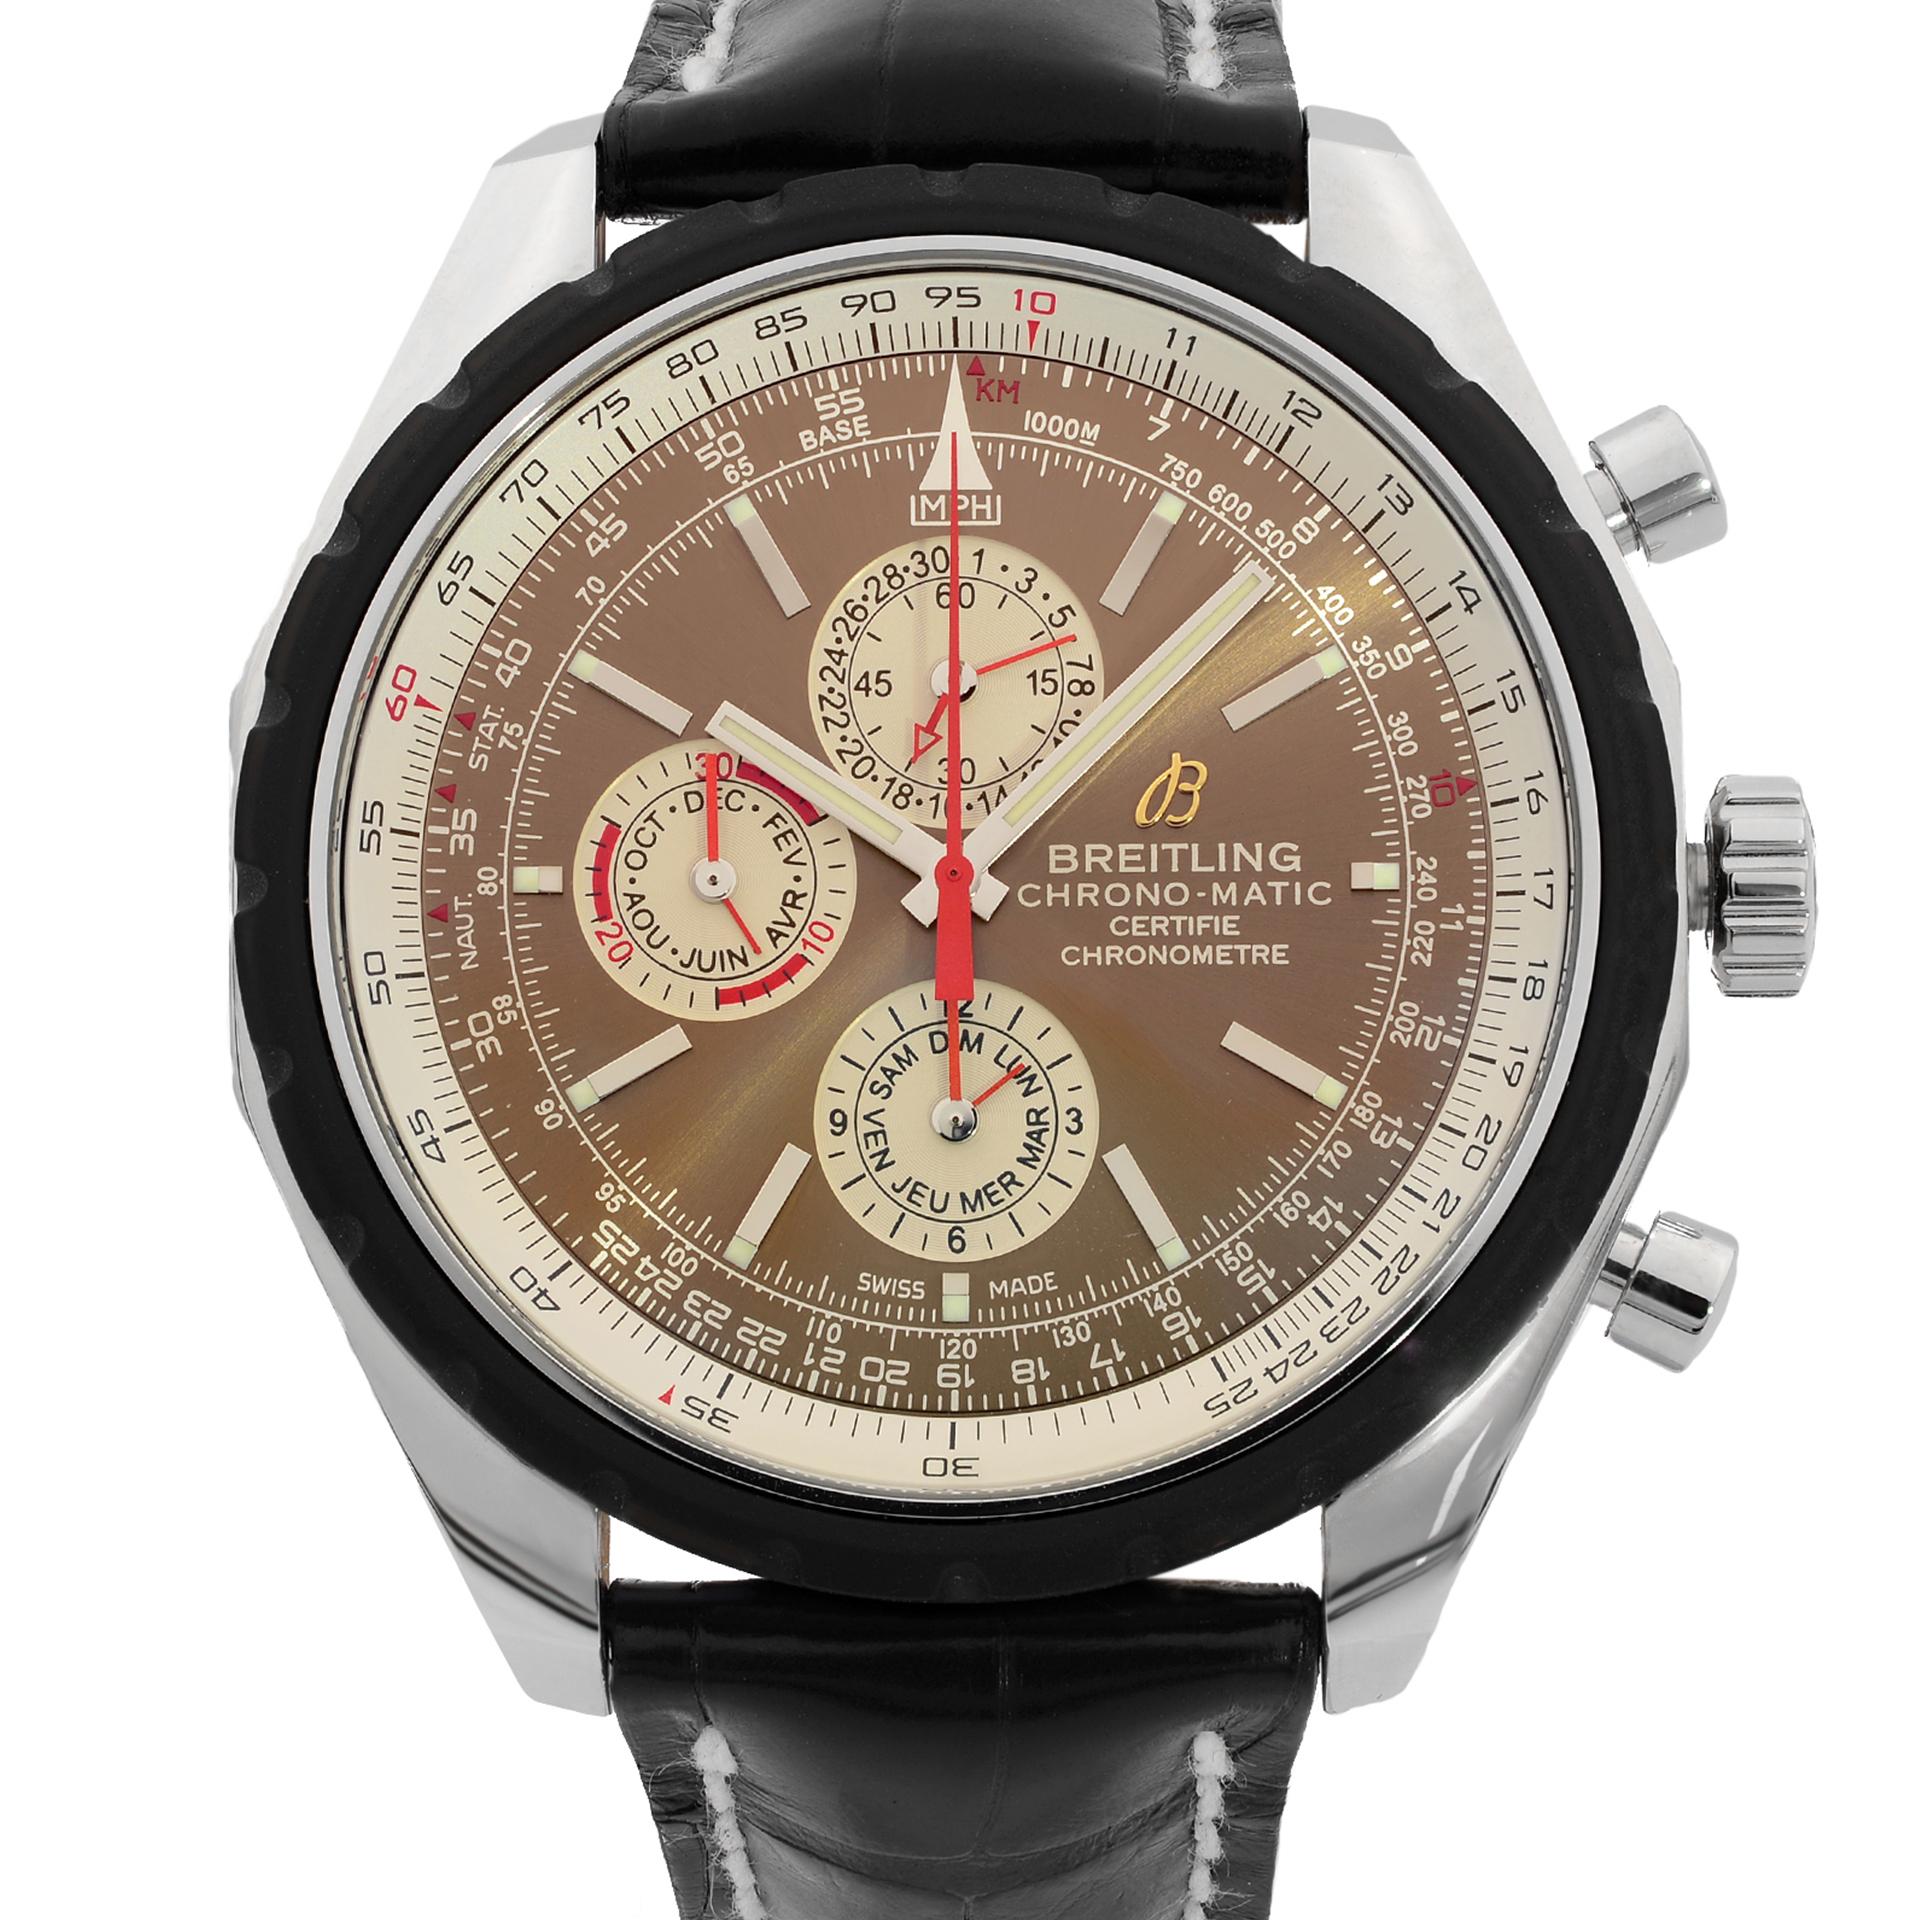 This  Breitling Chrono-Matic A1936002/Q573 is a beautiful men's timepiece that is powered by mechanical (hand-winding) movement which is cased in a stainless steel case. It has a round shape face, chronograph, date indicator, small seconds subdial,